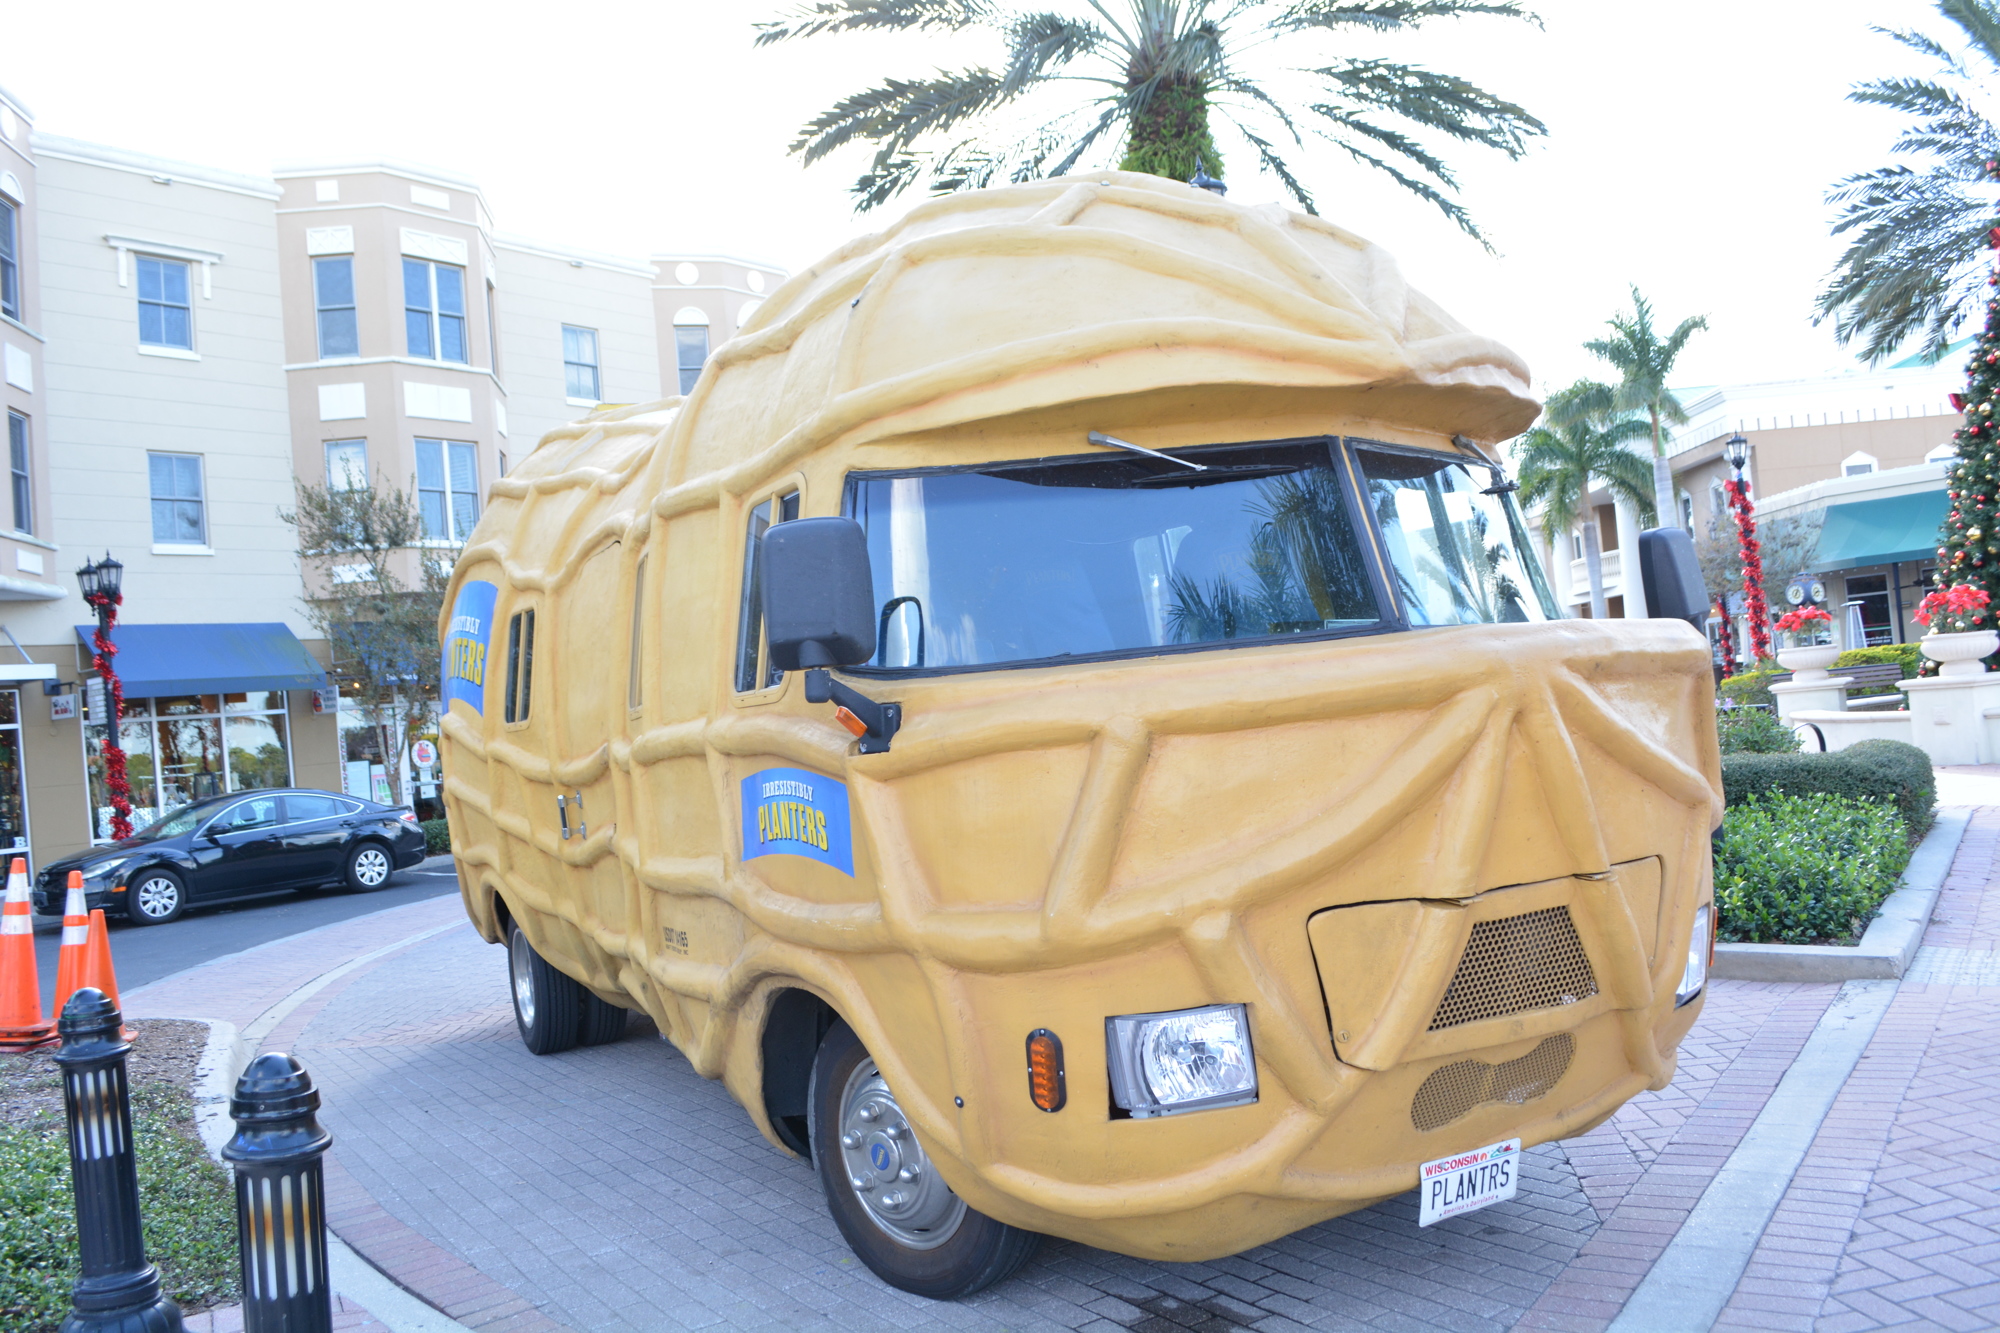 The Planter's NUTmobile visited Lakewood Ranch.